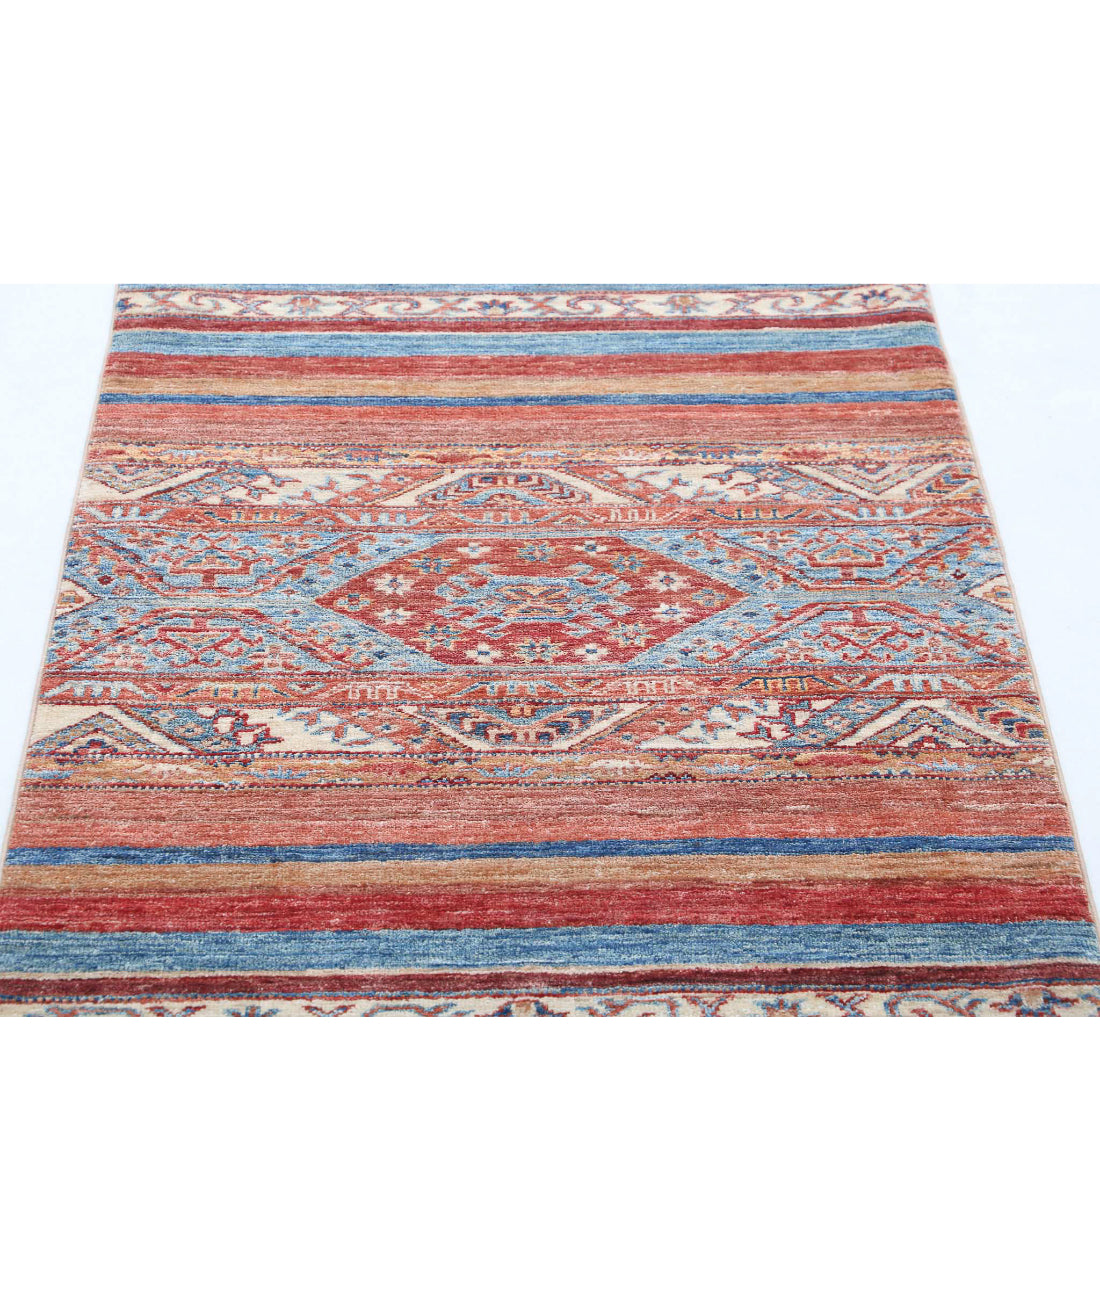 Hand Knotted Khurjeen Wool Rug - 2'8'' x 3'8'' 2'8'' x 3'8'' (80 X 110) / Multi / Multi